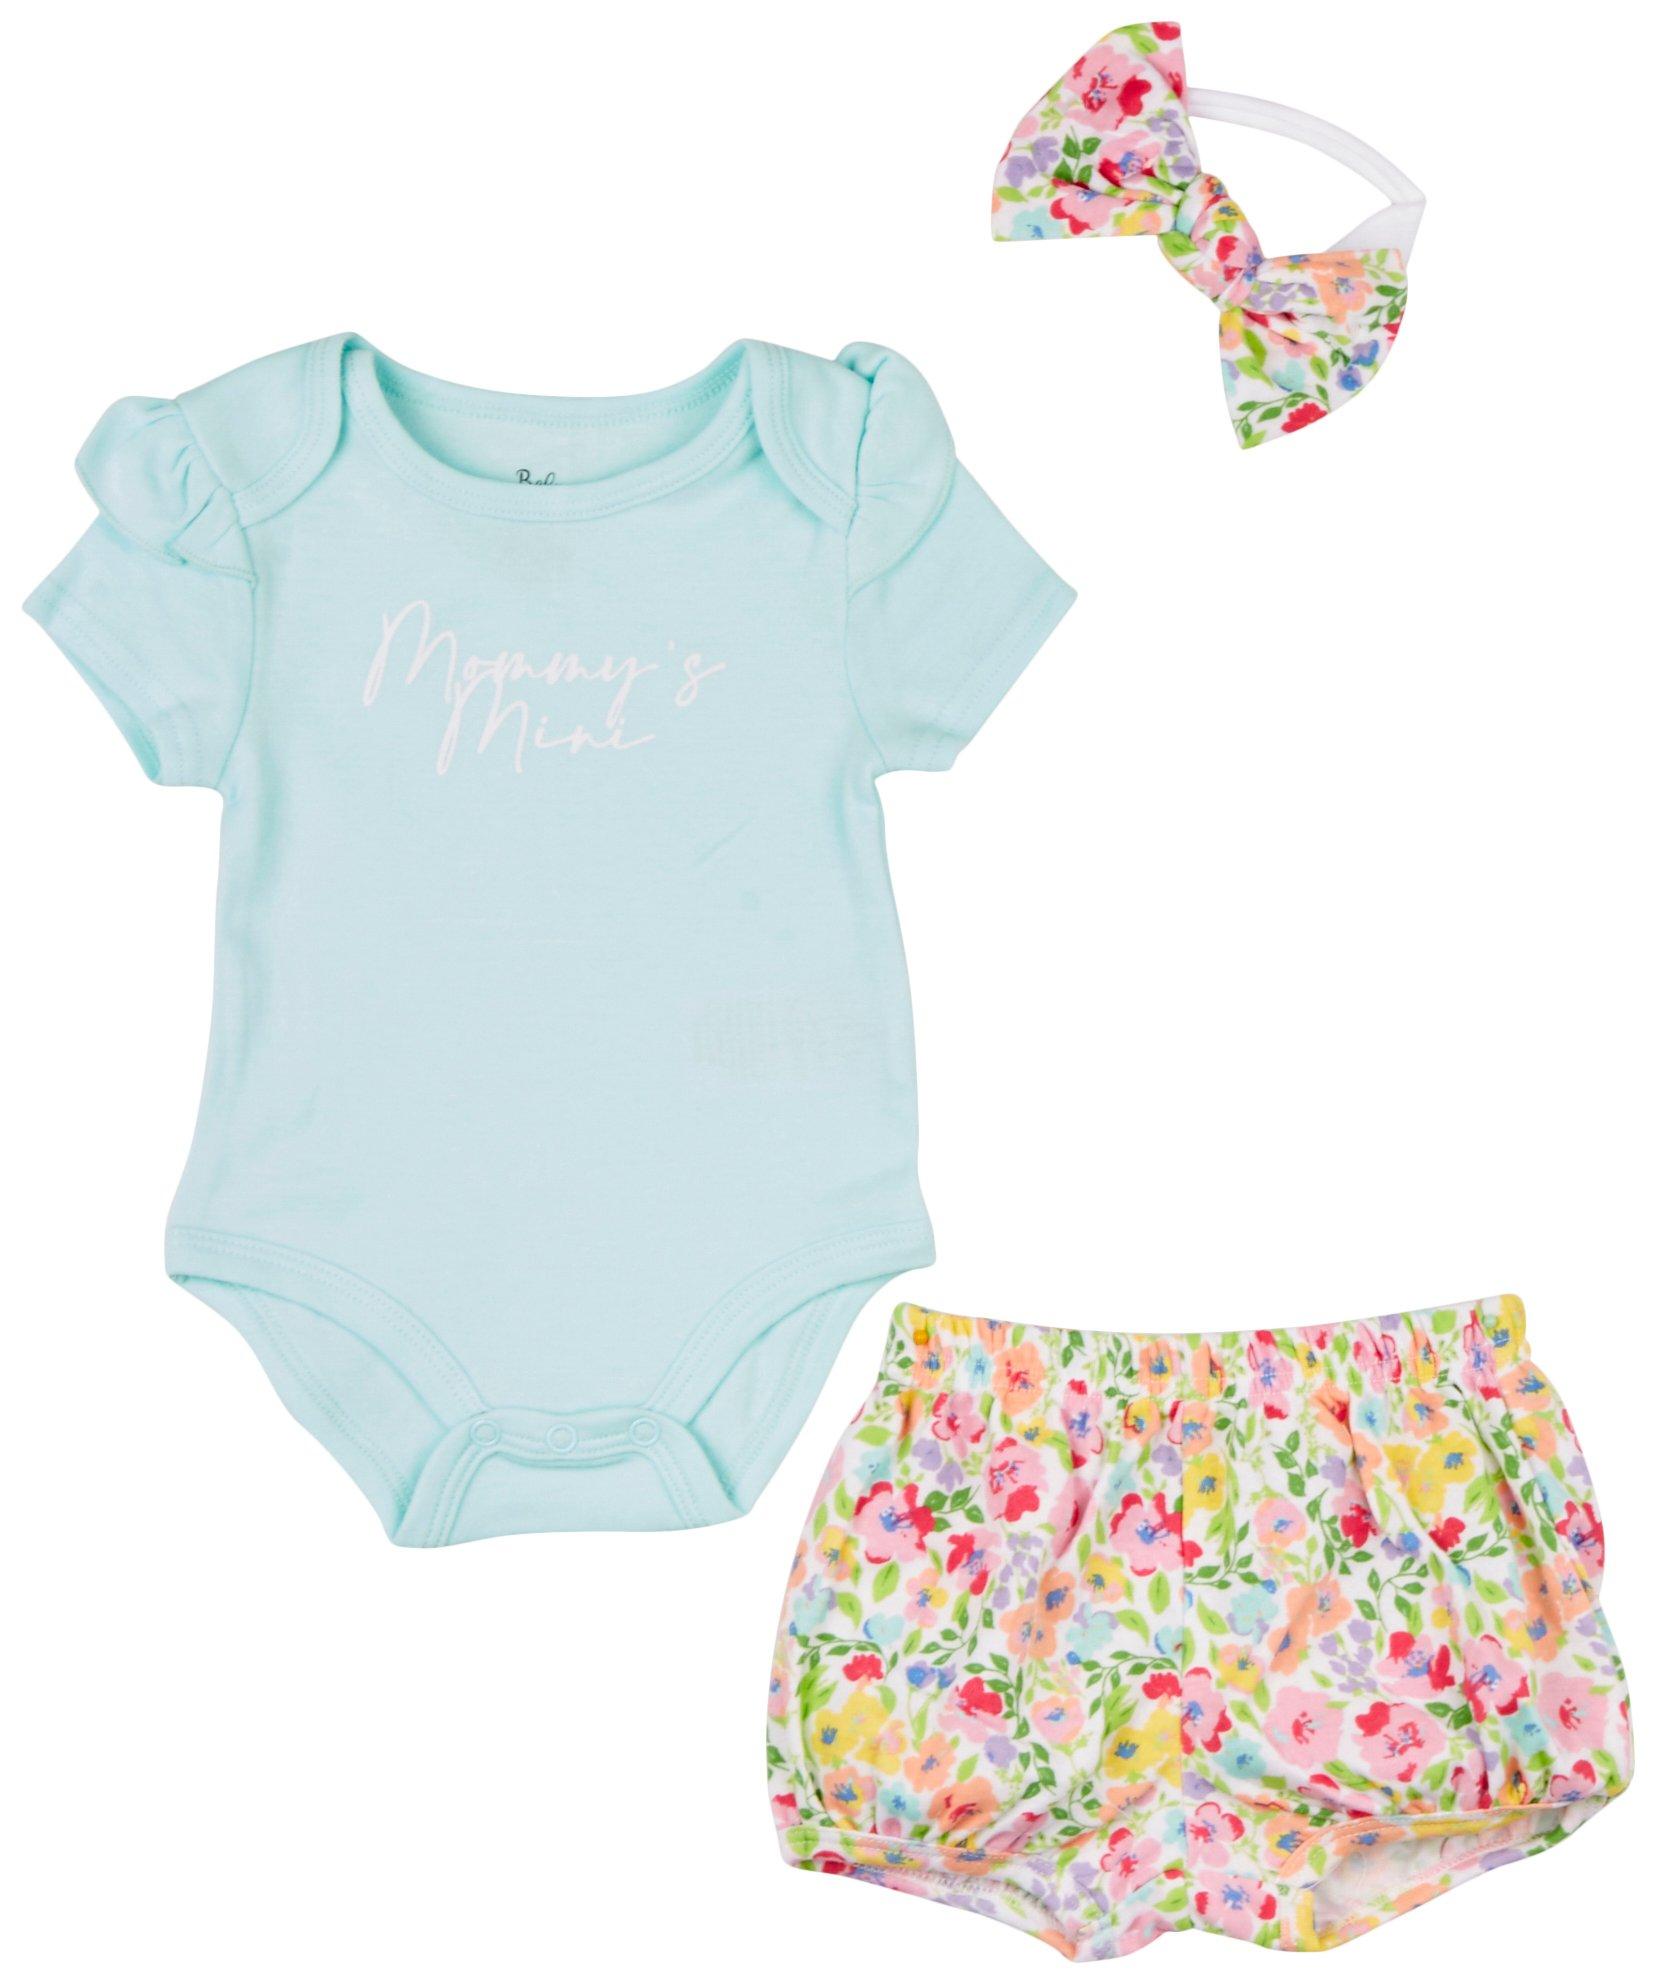 Baby Essentials Baby Girls 3-pc. Creeper and Shorts Set